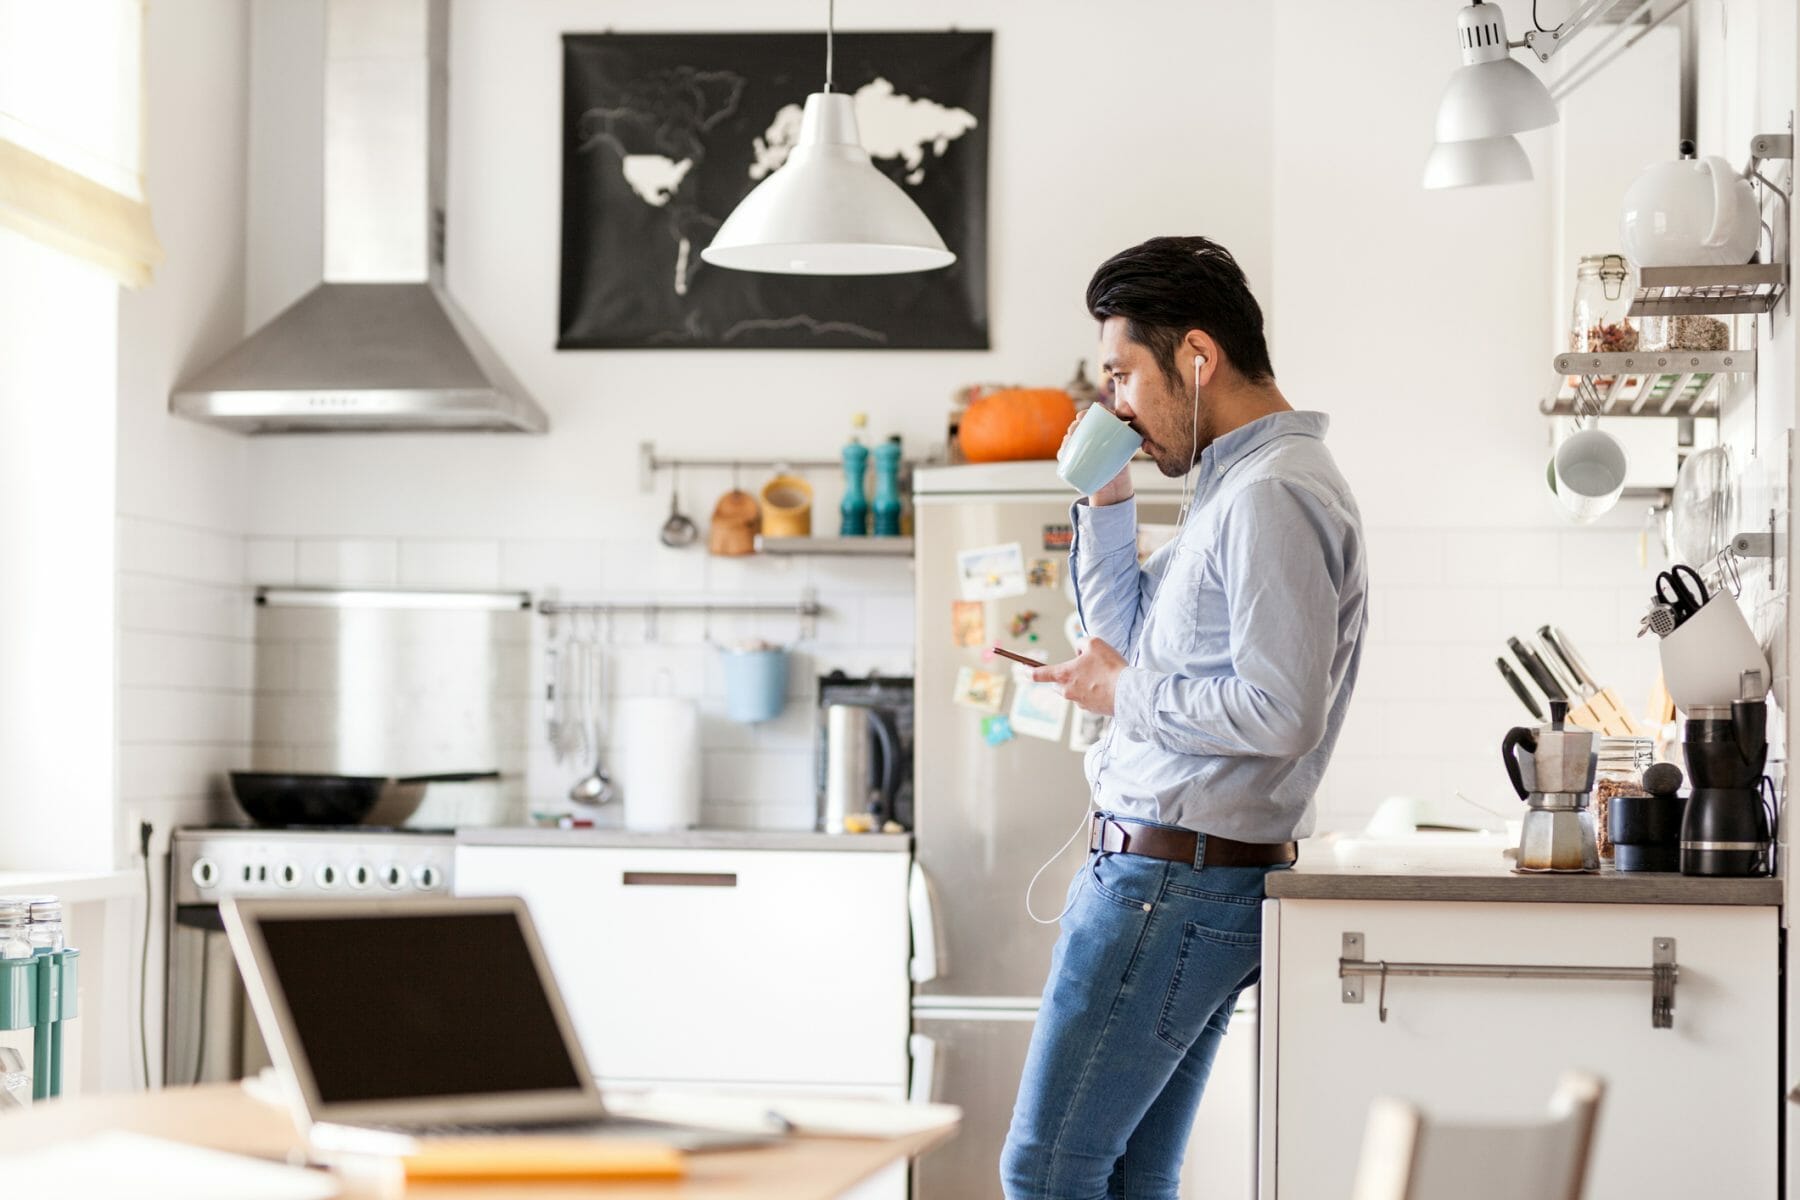 Man in kitchen sipping a coffee with headphones in looking at his phone